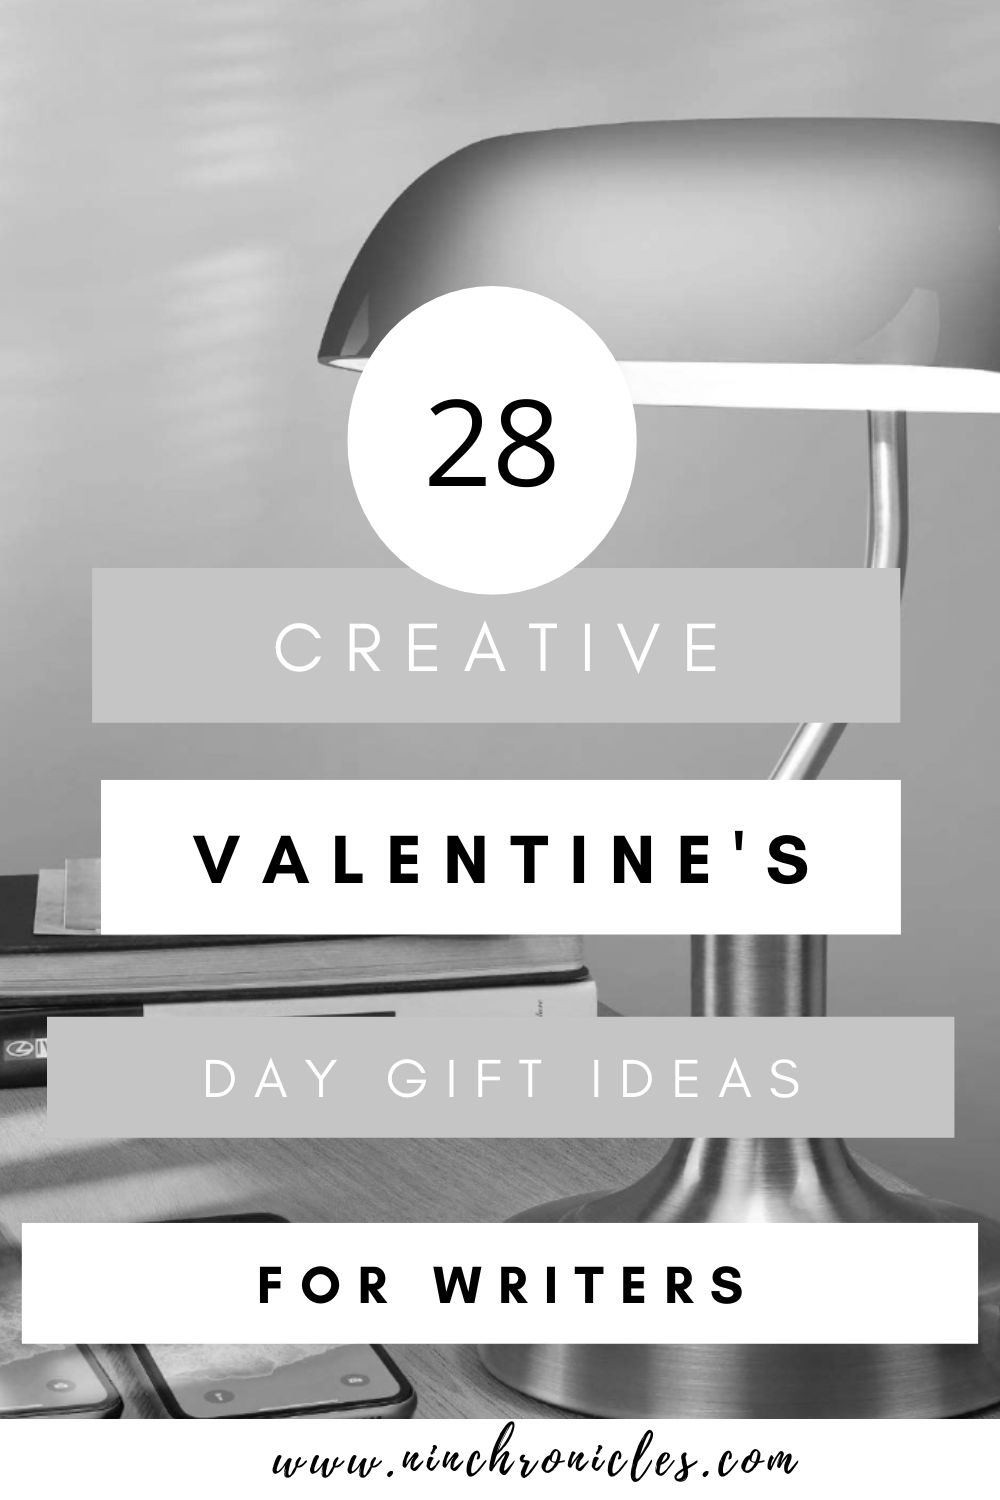 Valentine's Day Gift Ideas for Writers